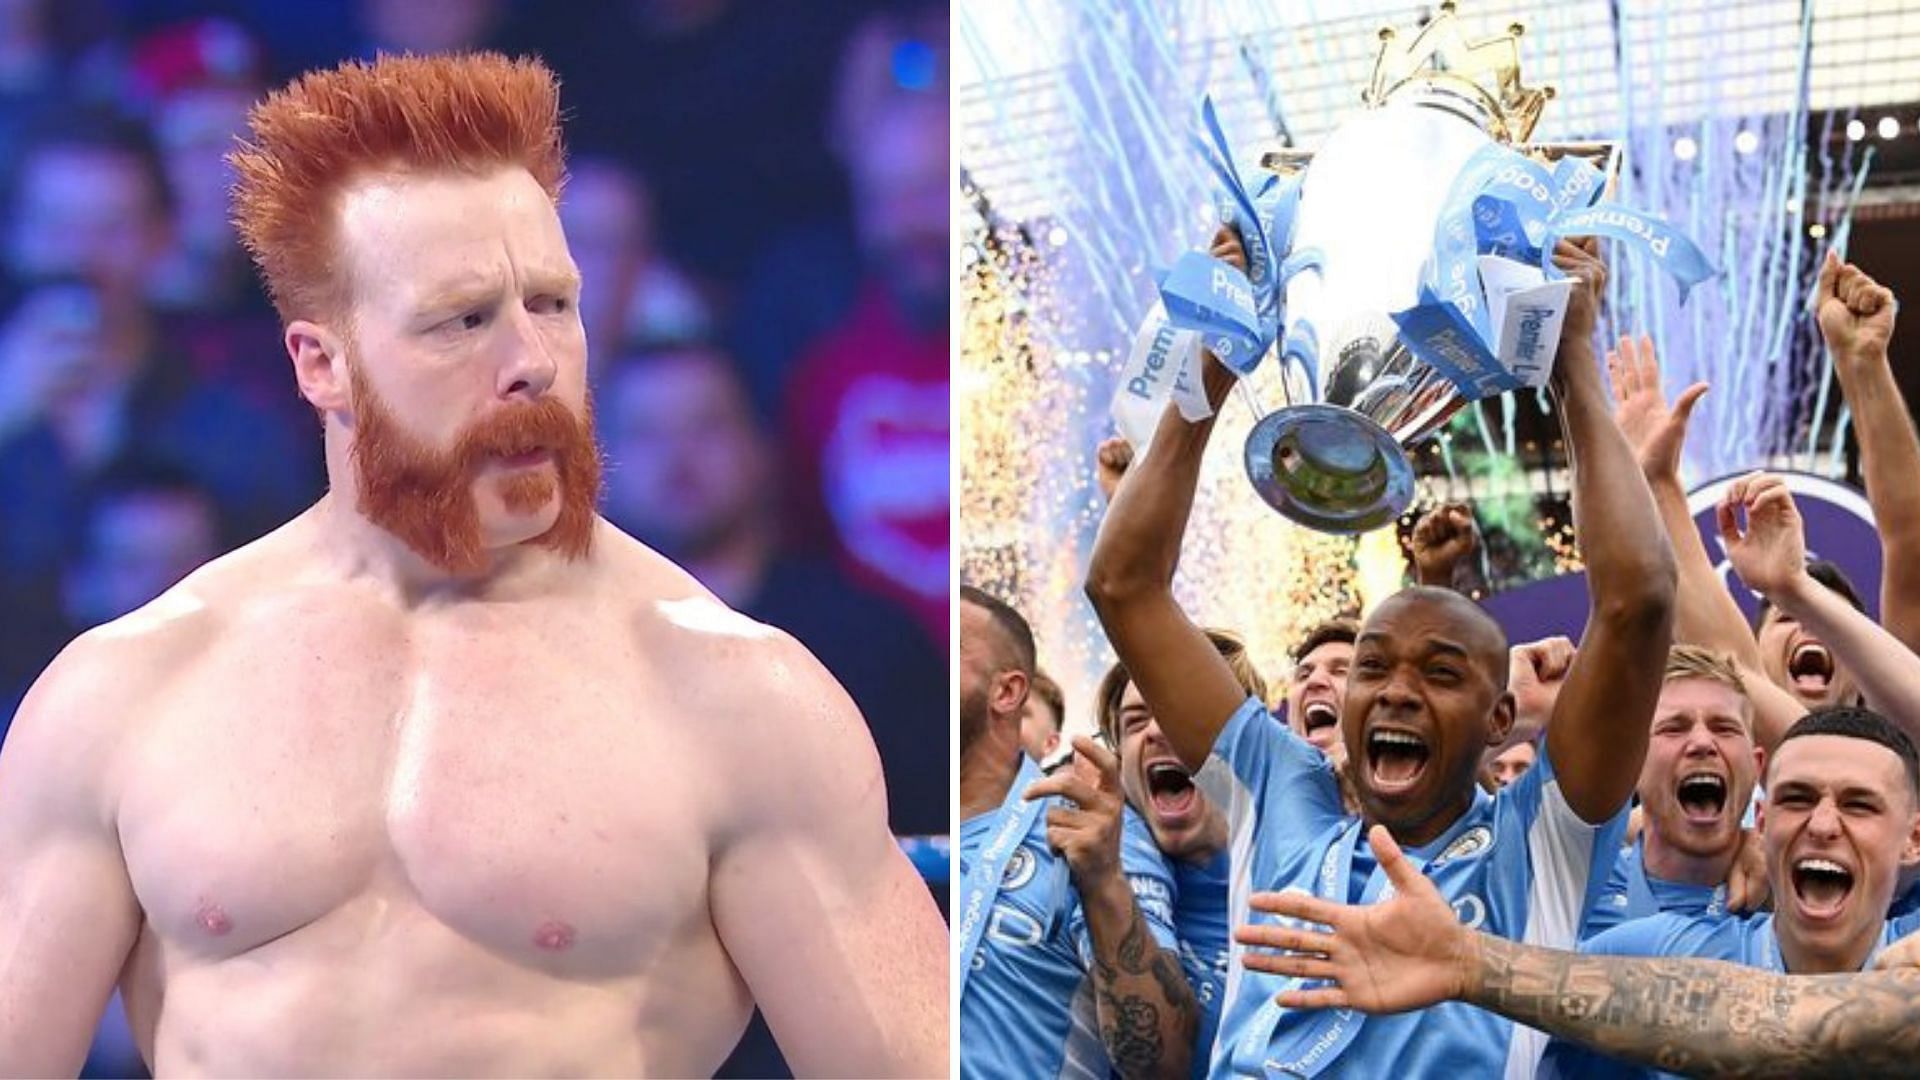 How did WWE Superstars react to the wild end the Premier League season